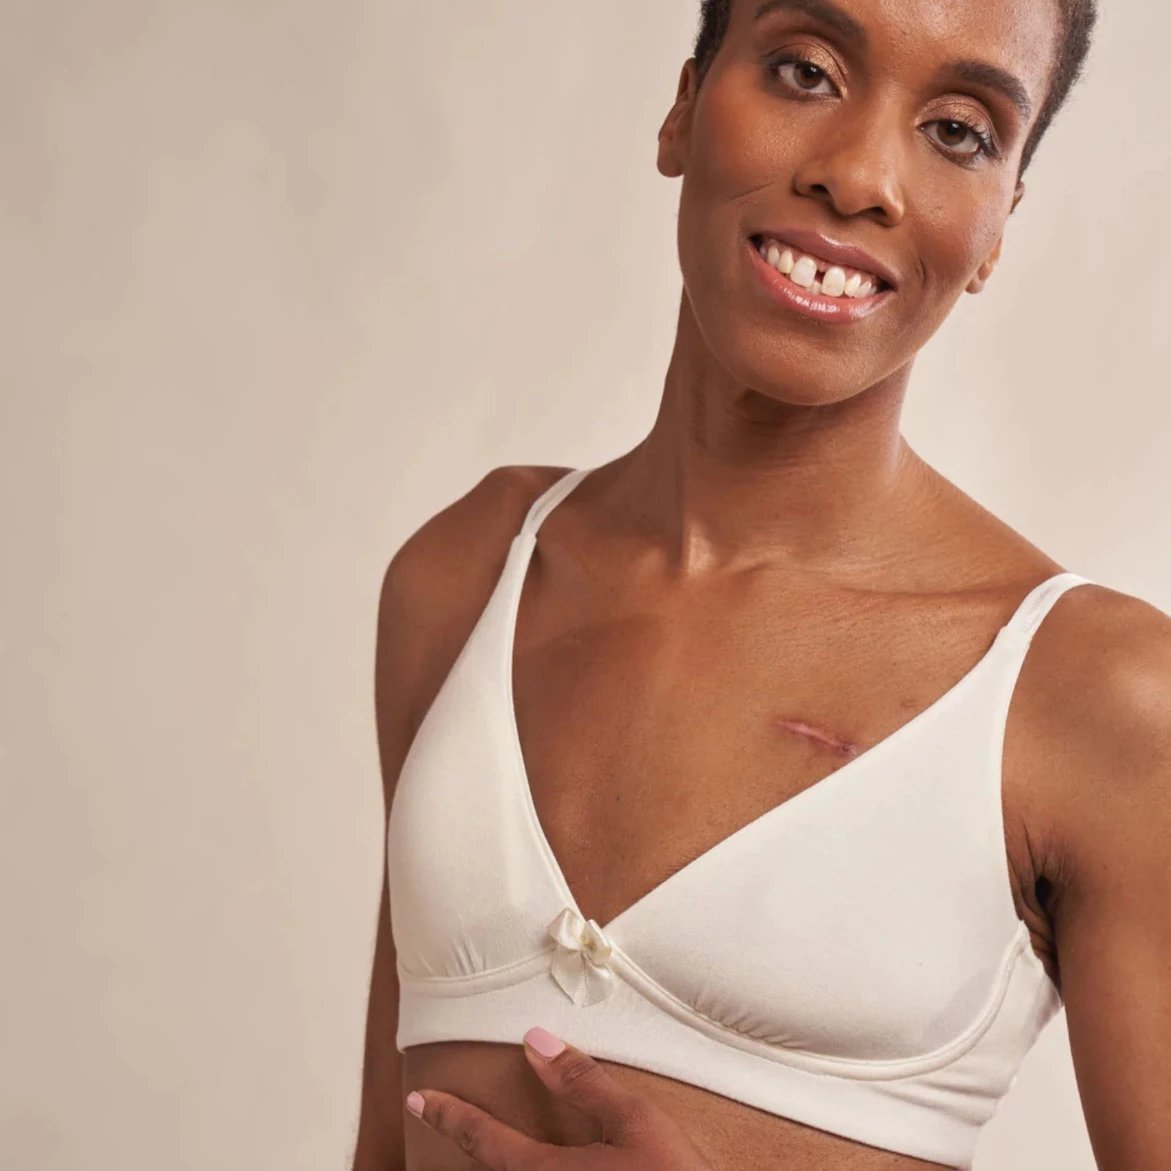 How To Find The Right Mastectomy Bra For You - A Fitting Experience